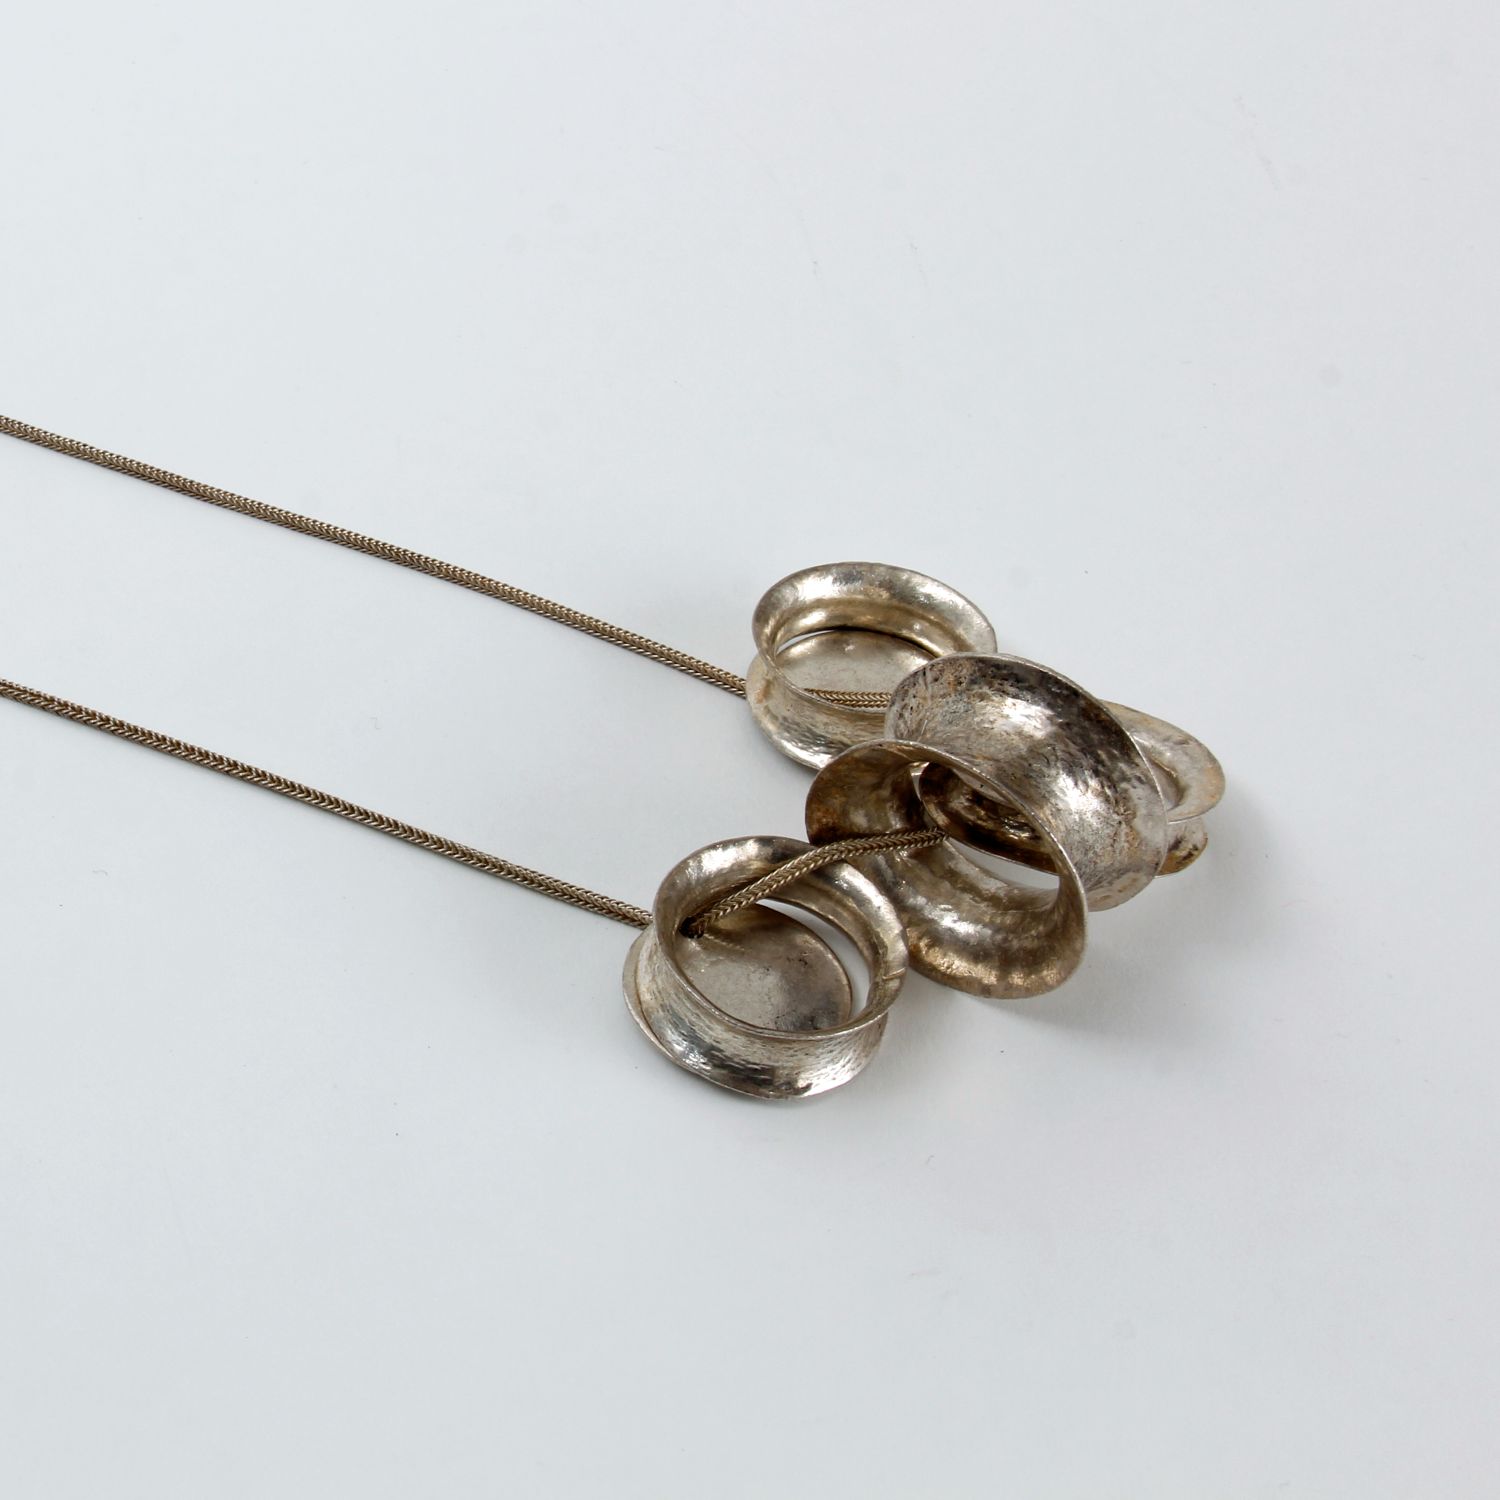 Elisabeth Riveiro: Necklace with Circular Rings Product Image 1 of 2